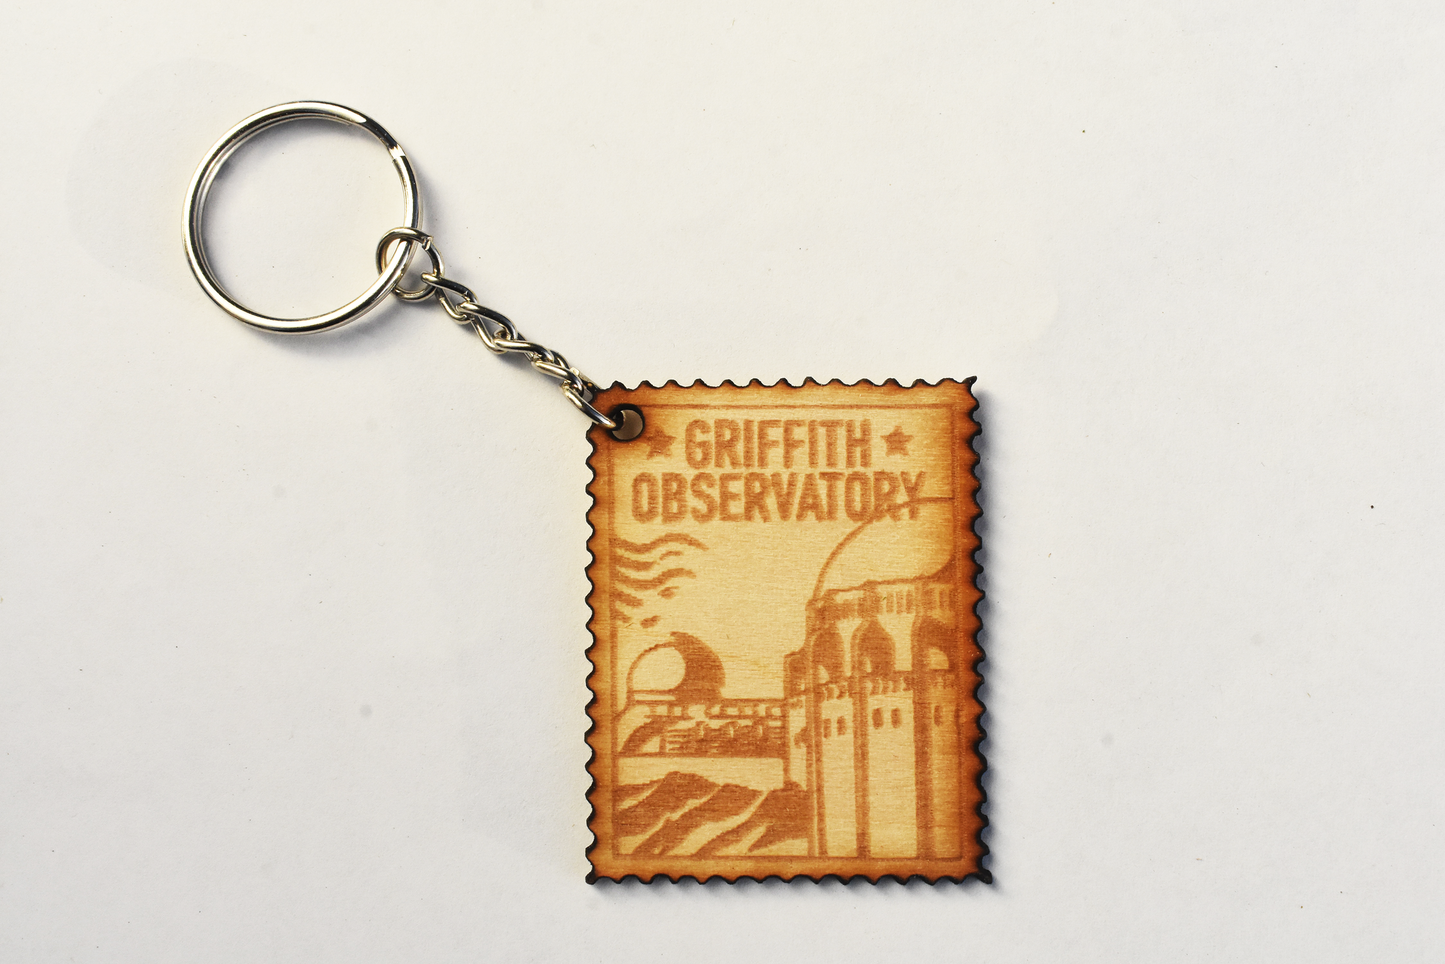 Griffith Observatory Keychain